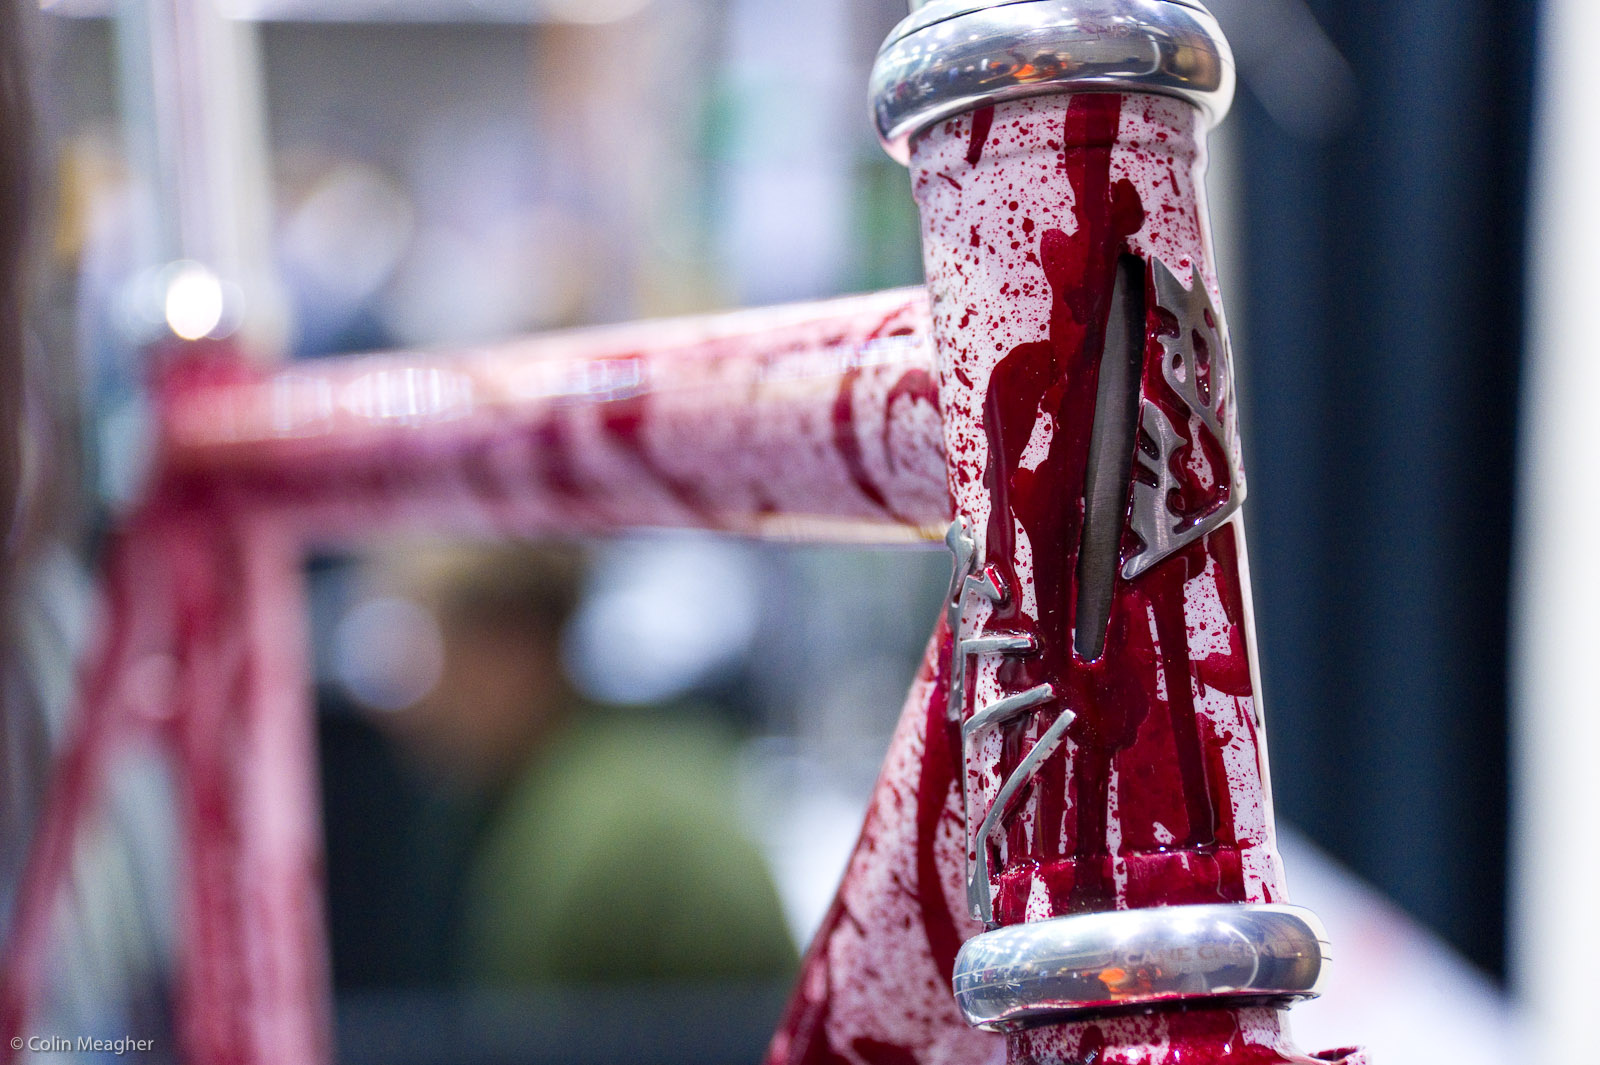 There were "axe wounds" to the head tube and head badge.